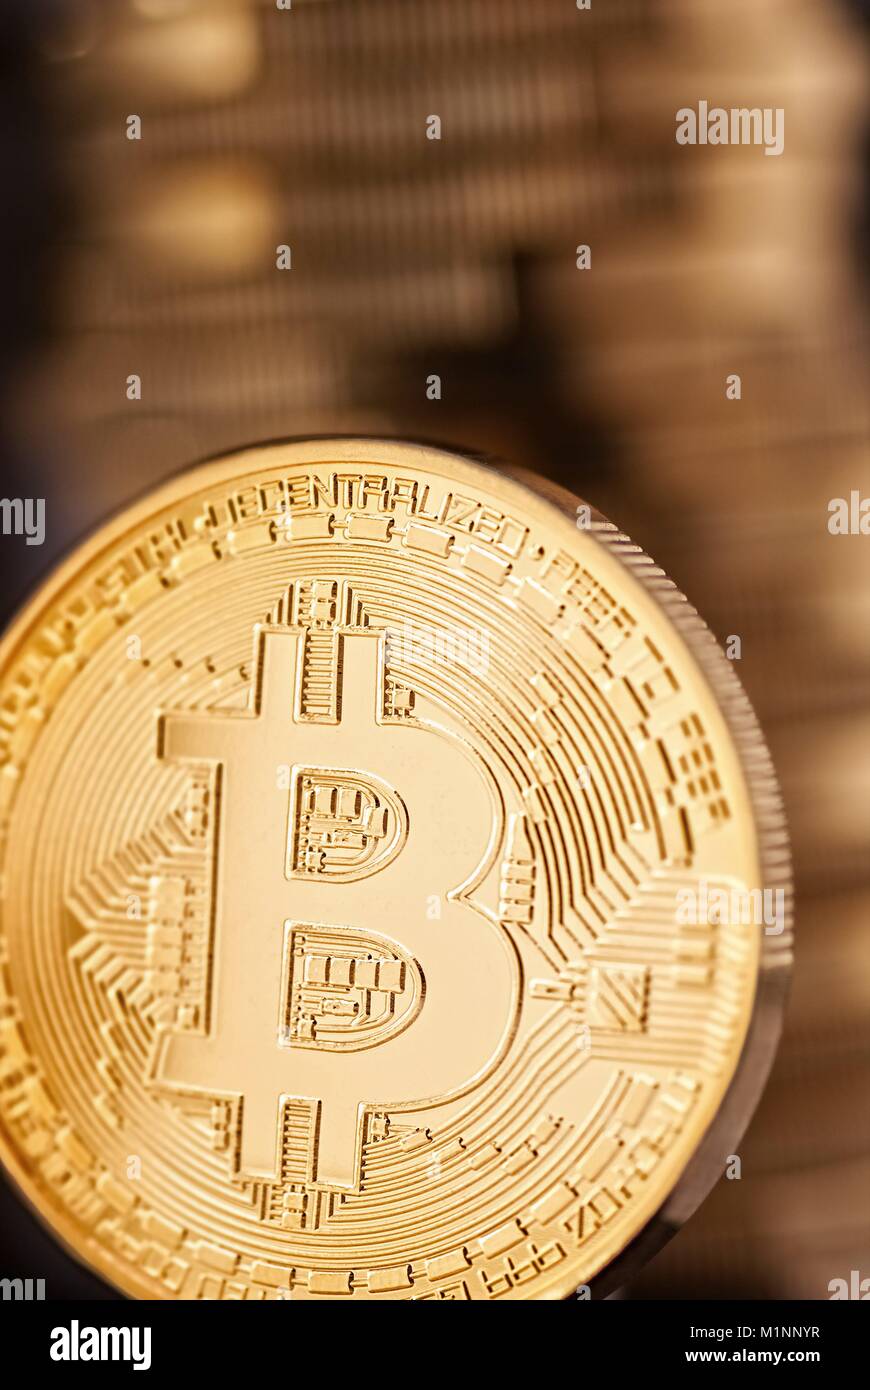 Bitcoin with coins stack in the background | usage worldwide Stock Photo